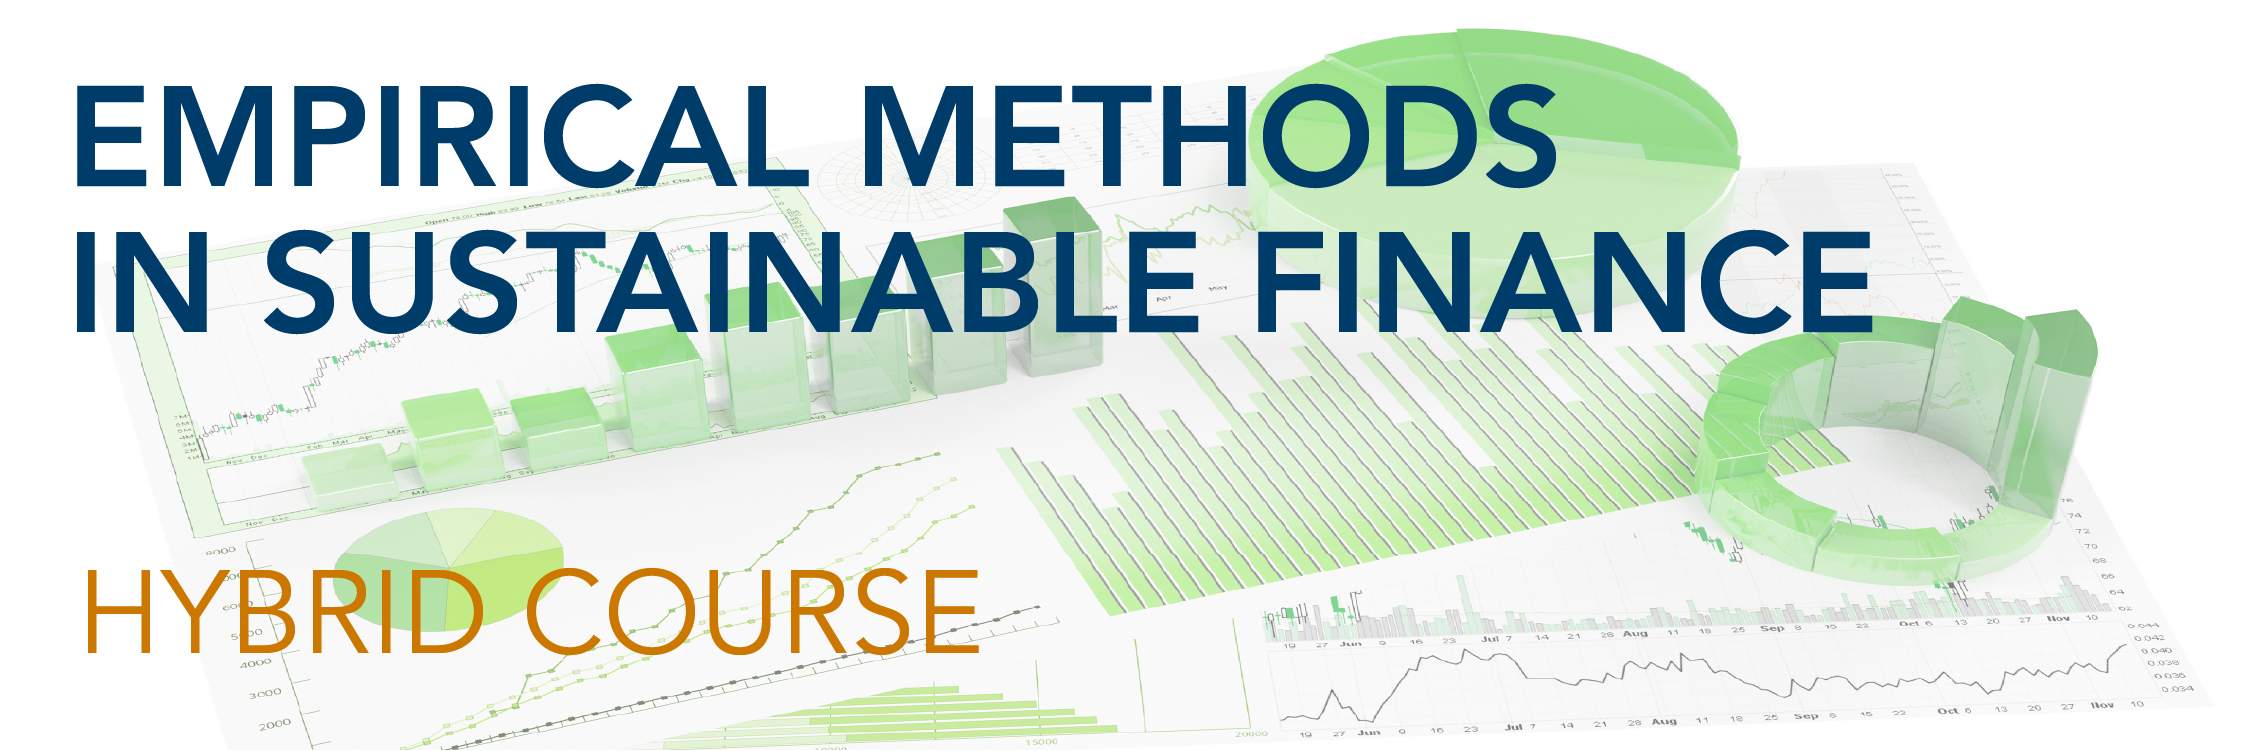 Empirical Methods in Sustainable Finance